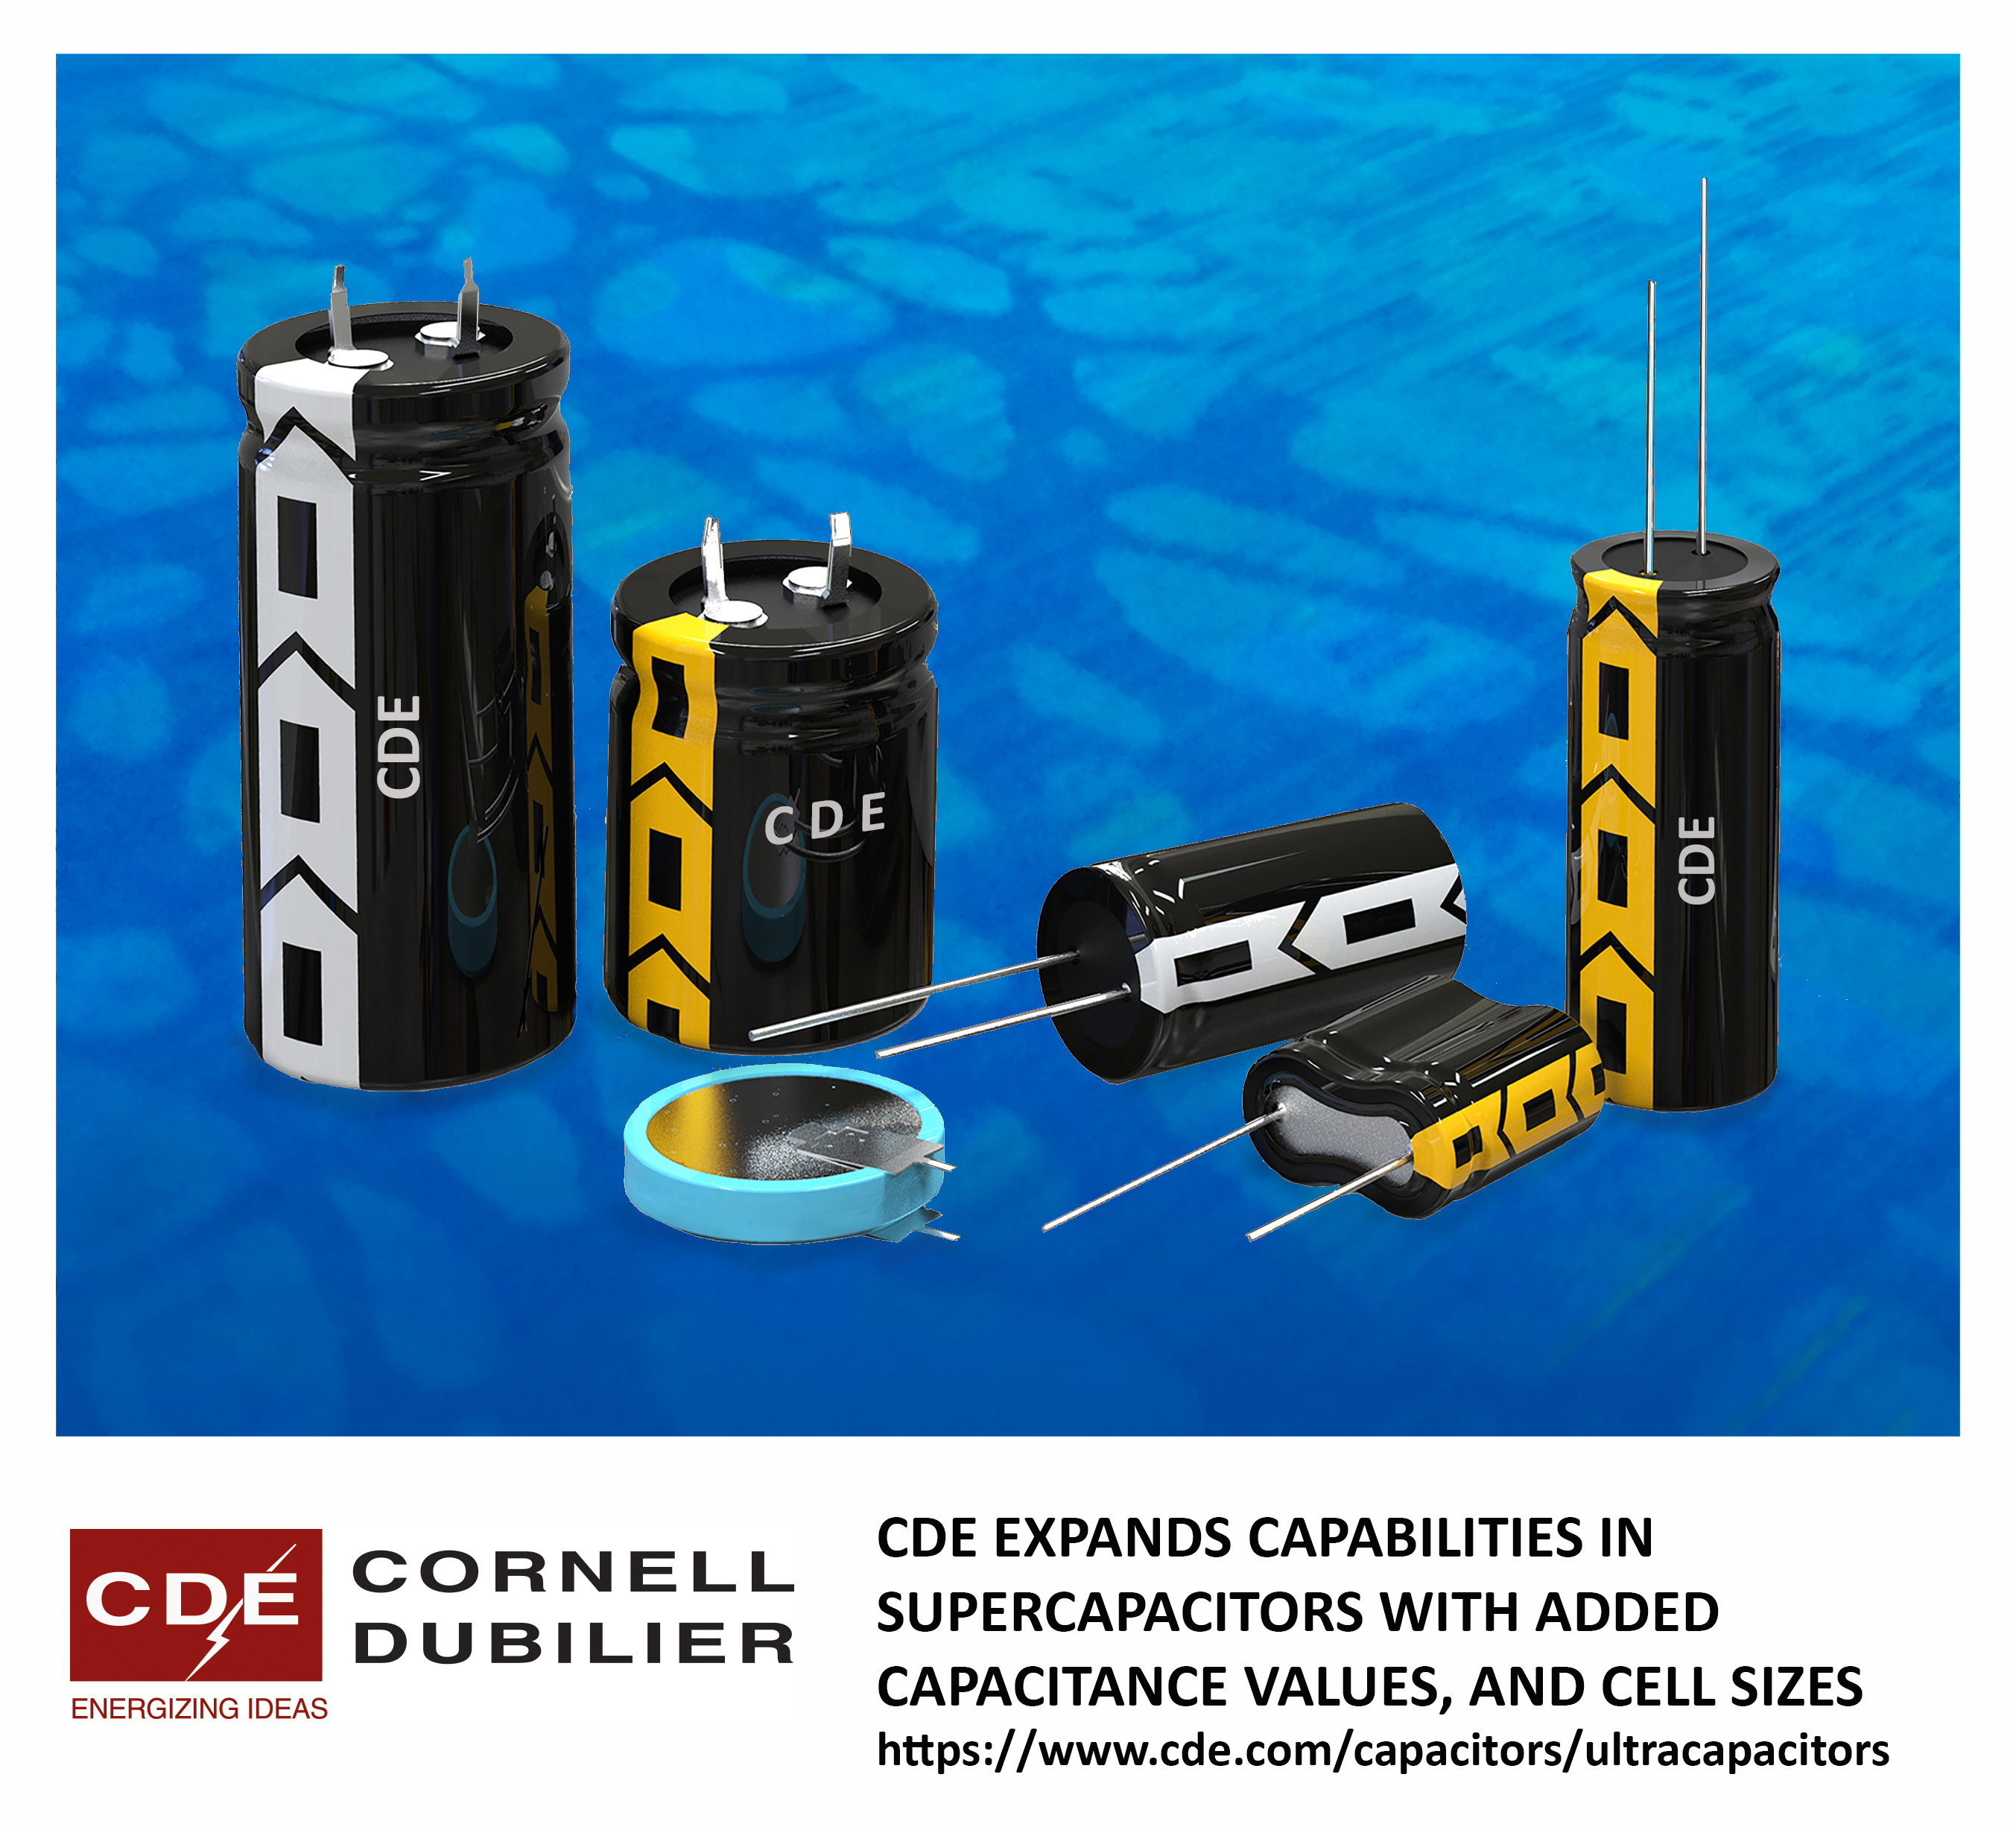 Cornell Dubilier Announces Expanded Supercapacitor Offerings